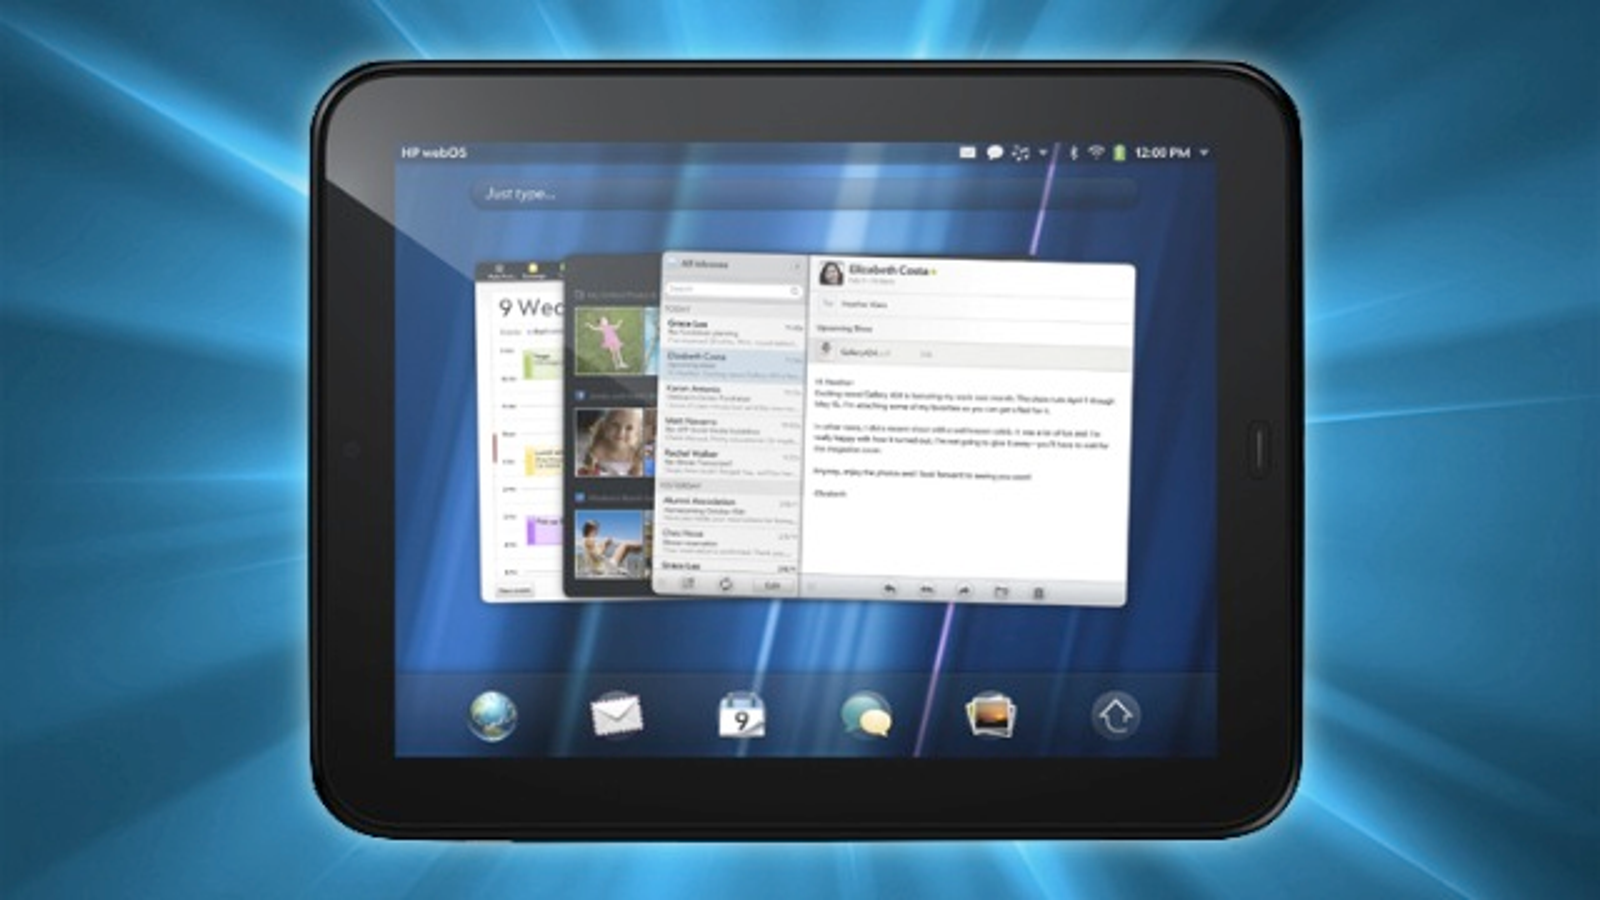 hp touchpad update android